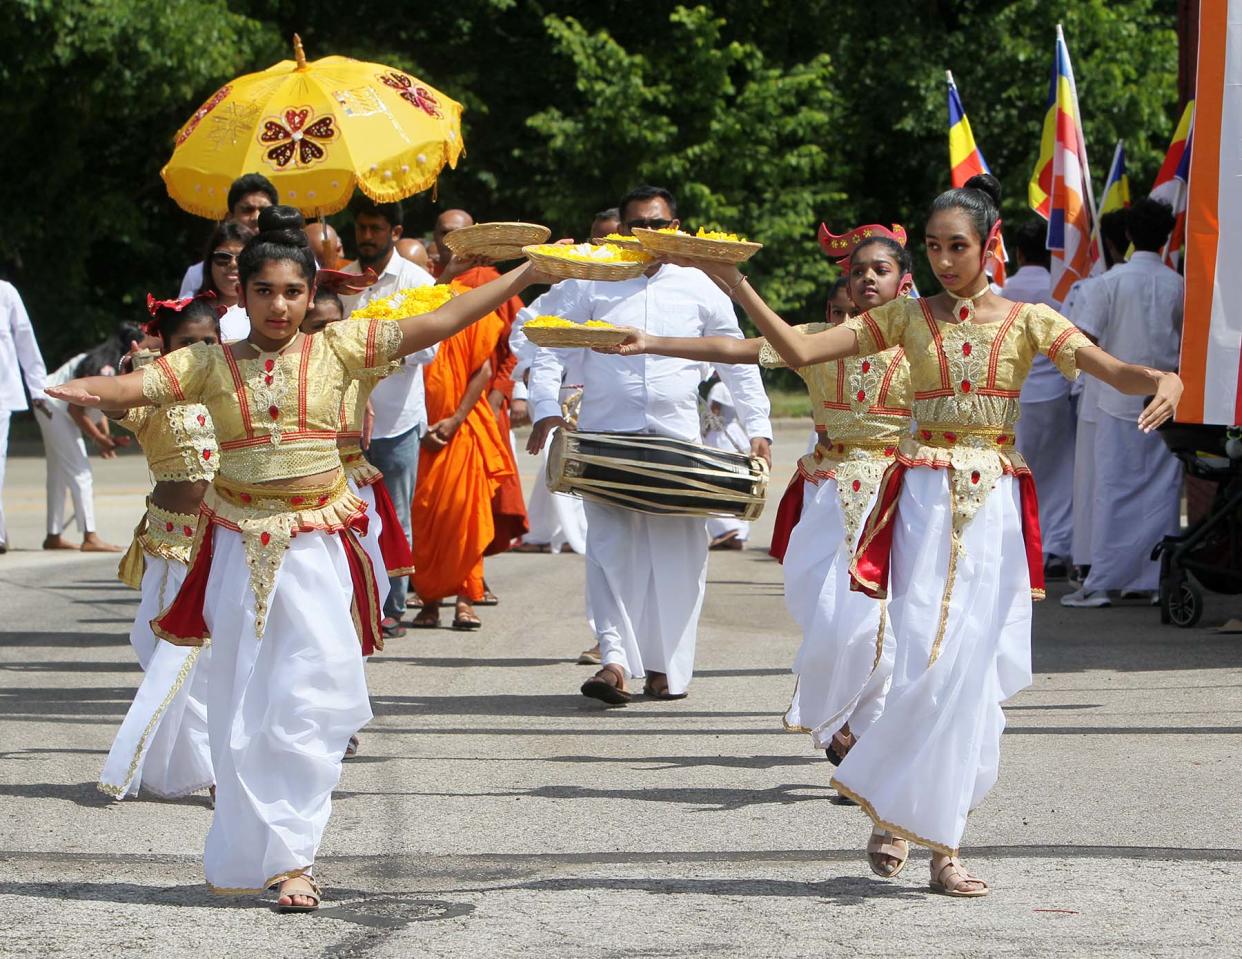 Dancers in traditional costumes lead the Procession of Maha Sangha to the dedication ceremony for the Cleveland Buddhist Vihara and Meditation Center in Akron on Saturday.